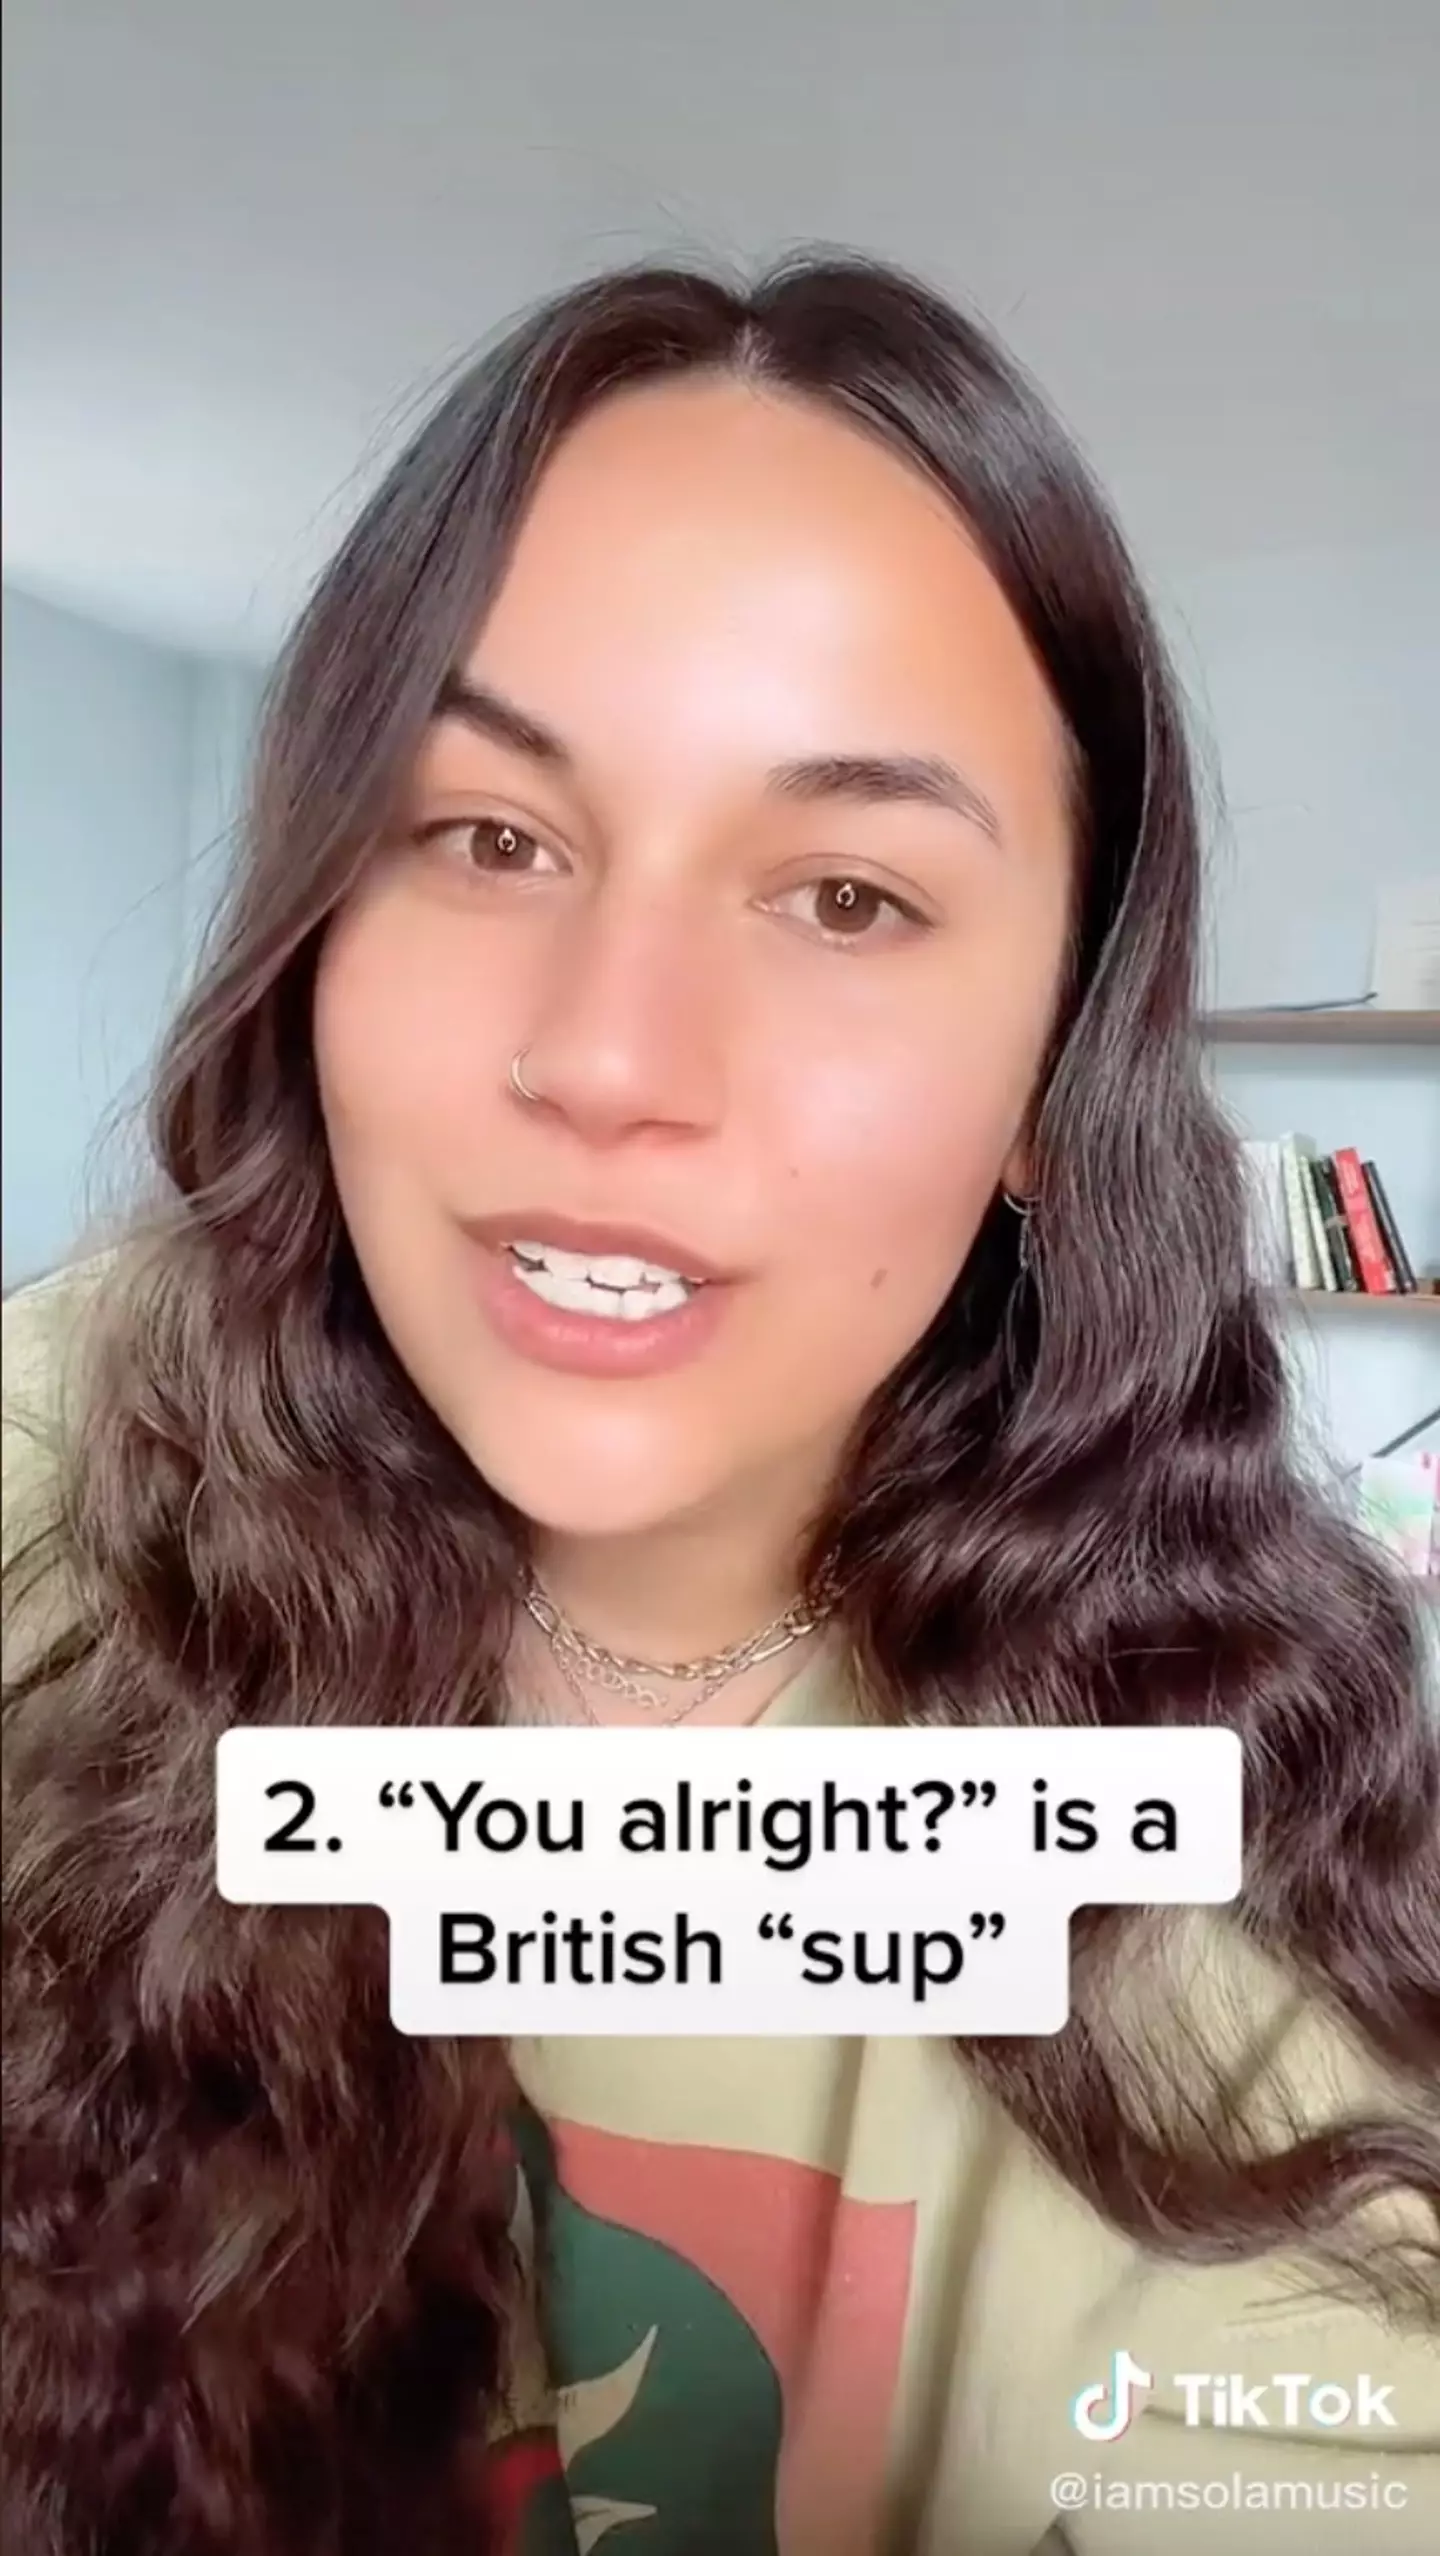 An American woman’s hilarious tips about the UK have gone viral.